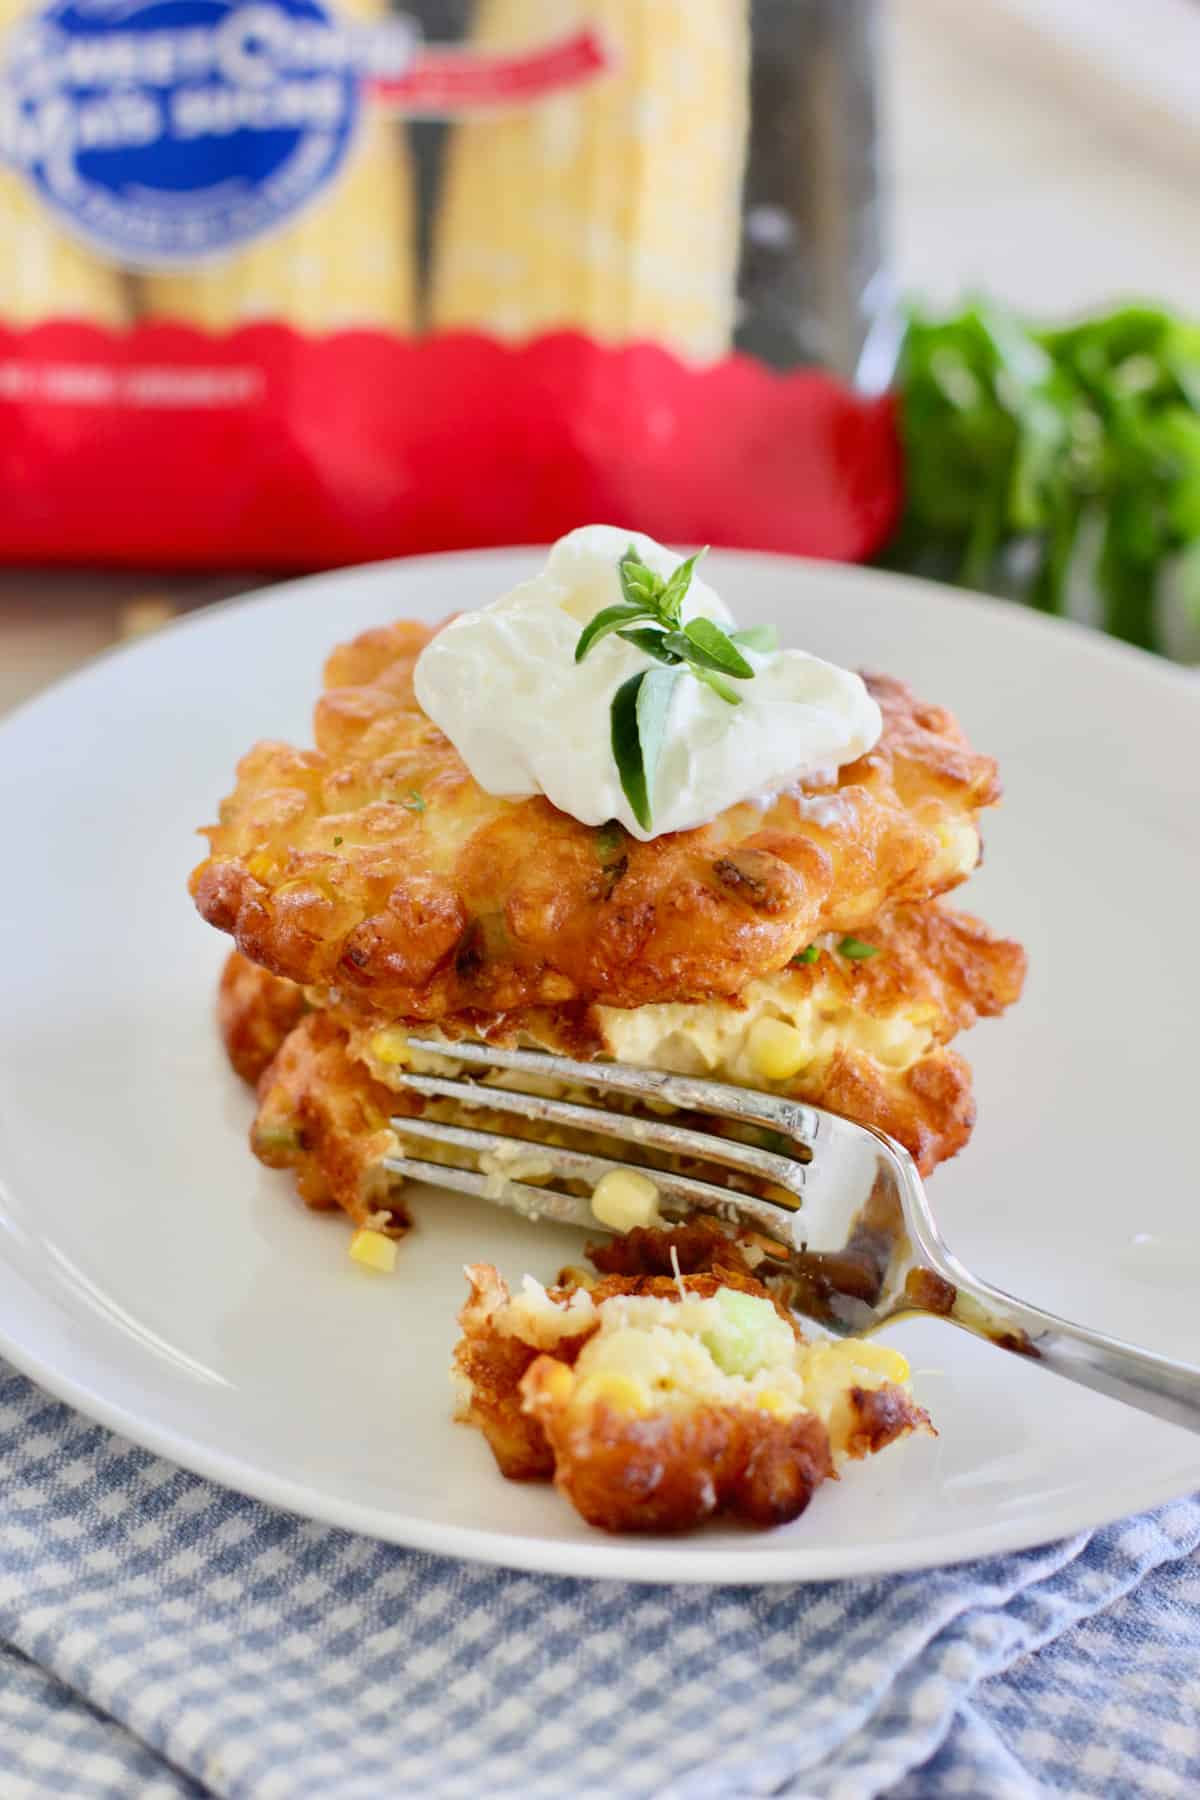 Corn fritters with sour cream